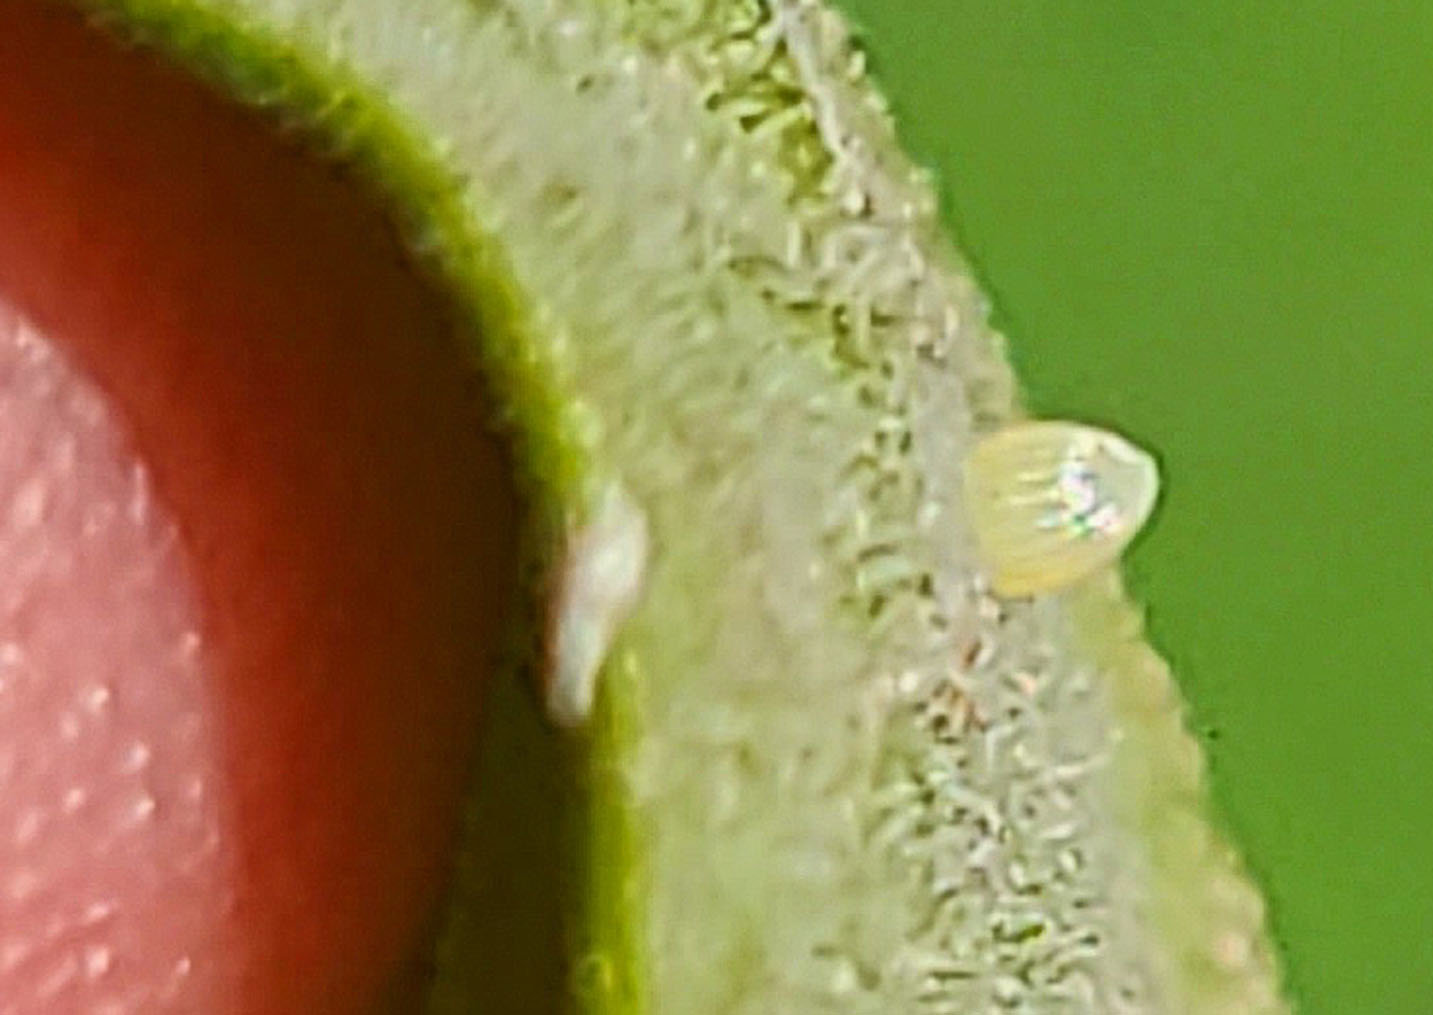 This is a single monarch egg on the bottom side of a milkweed plant, a few minutes after I saw an adult female depositing it, and others, on a stand of milkweed. They are tiny, but can be seen with the naked eye. In a few days, this egg will hatch, and the eventual adult will also become part of this year’s migration if it survives for the next few weeks.